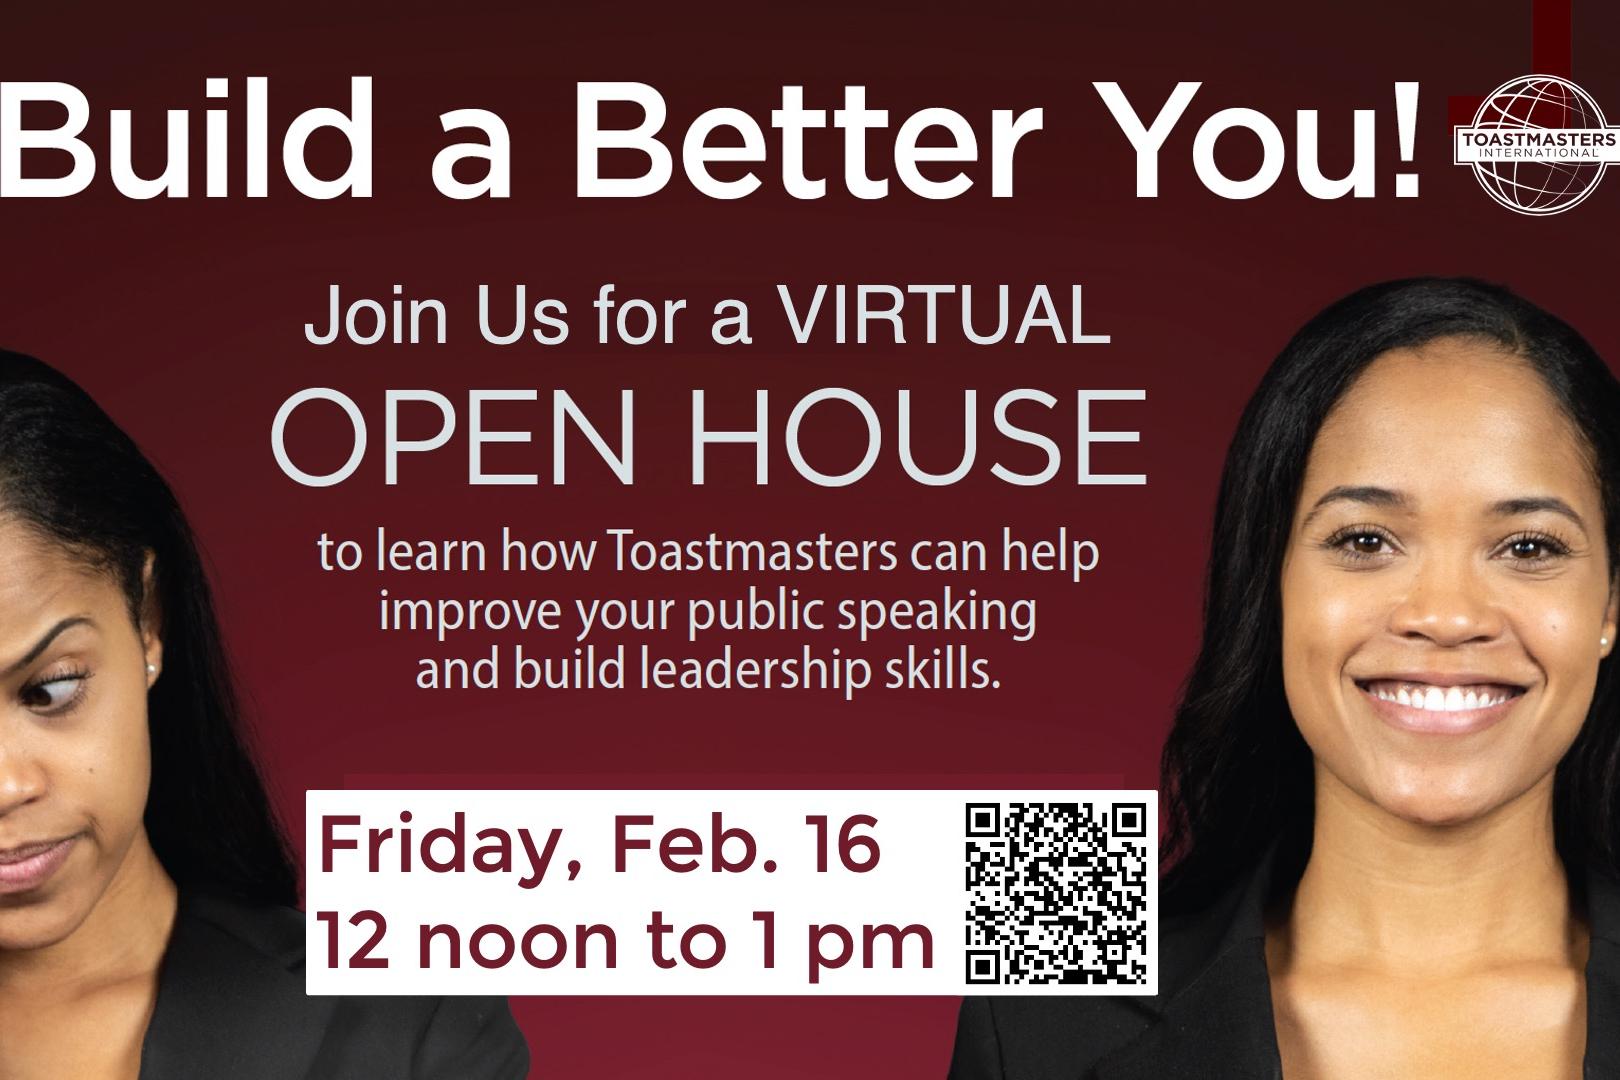 Build a Better You with Toastmasters